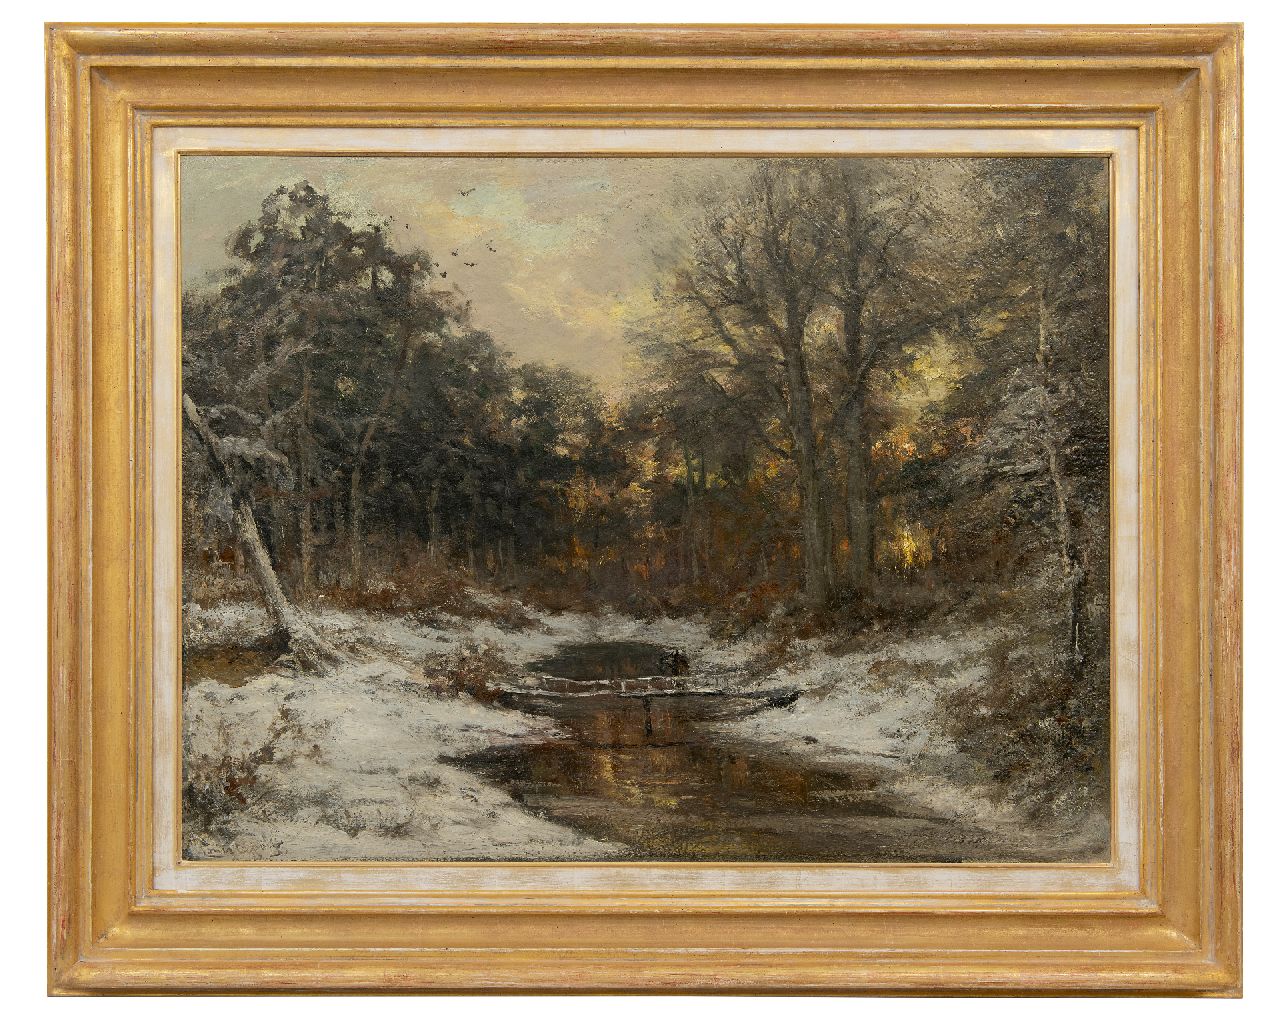 Apol L.F.H.  | Lodewijk Franciscus Hendrik 'Louis' Apol | Paintings offered for sale | Snowy forest at sunset, oil on canvas 71.0 x 92.6 cm, signed l.l.